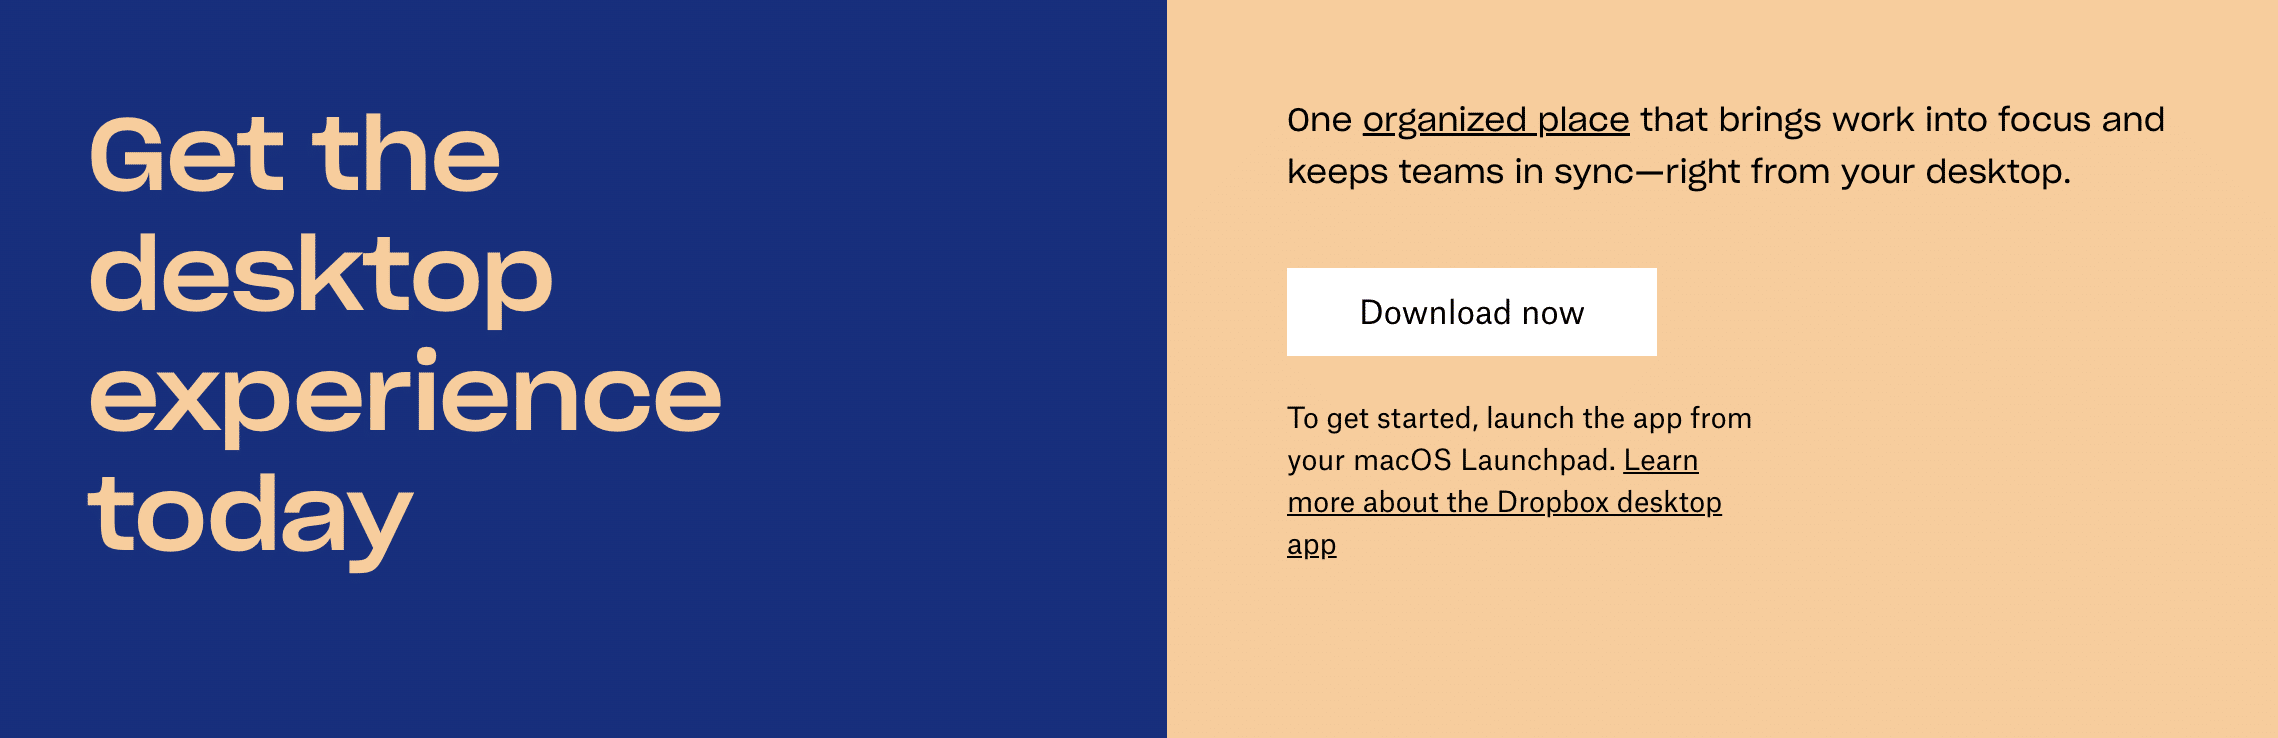 Dropbox download page